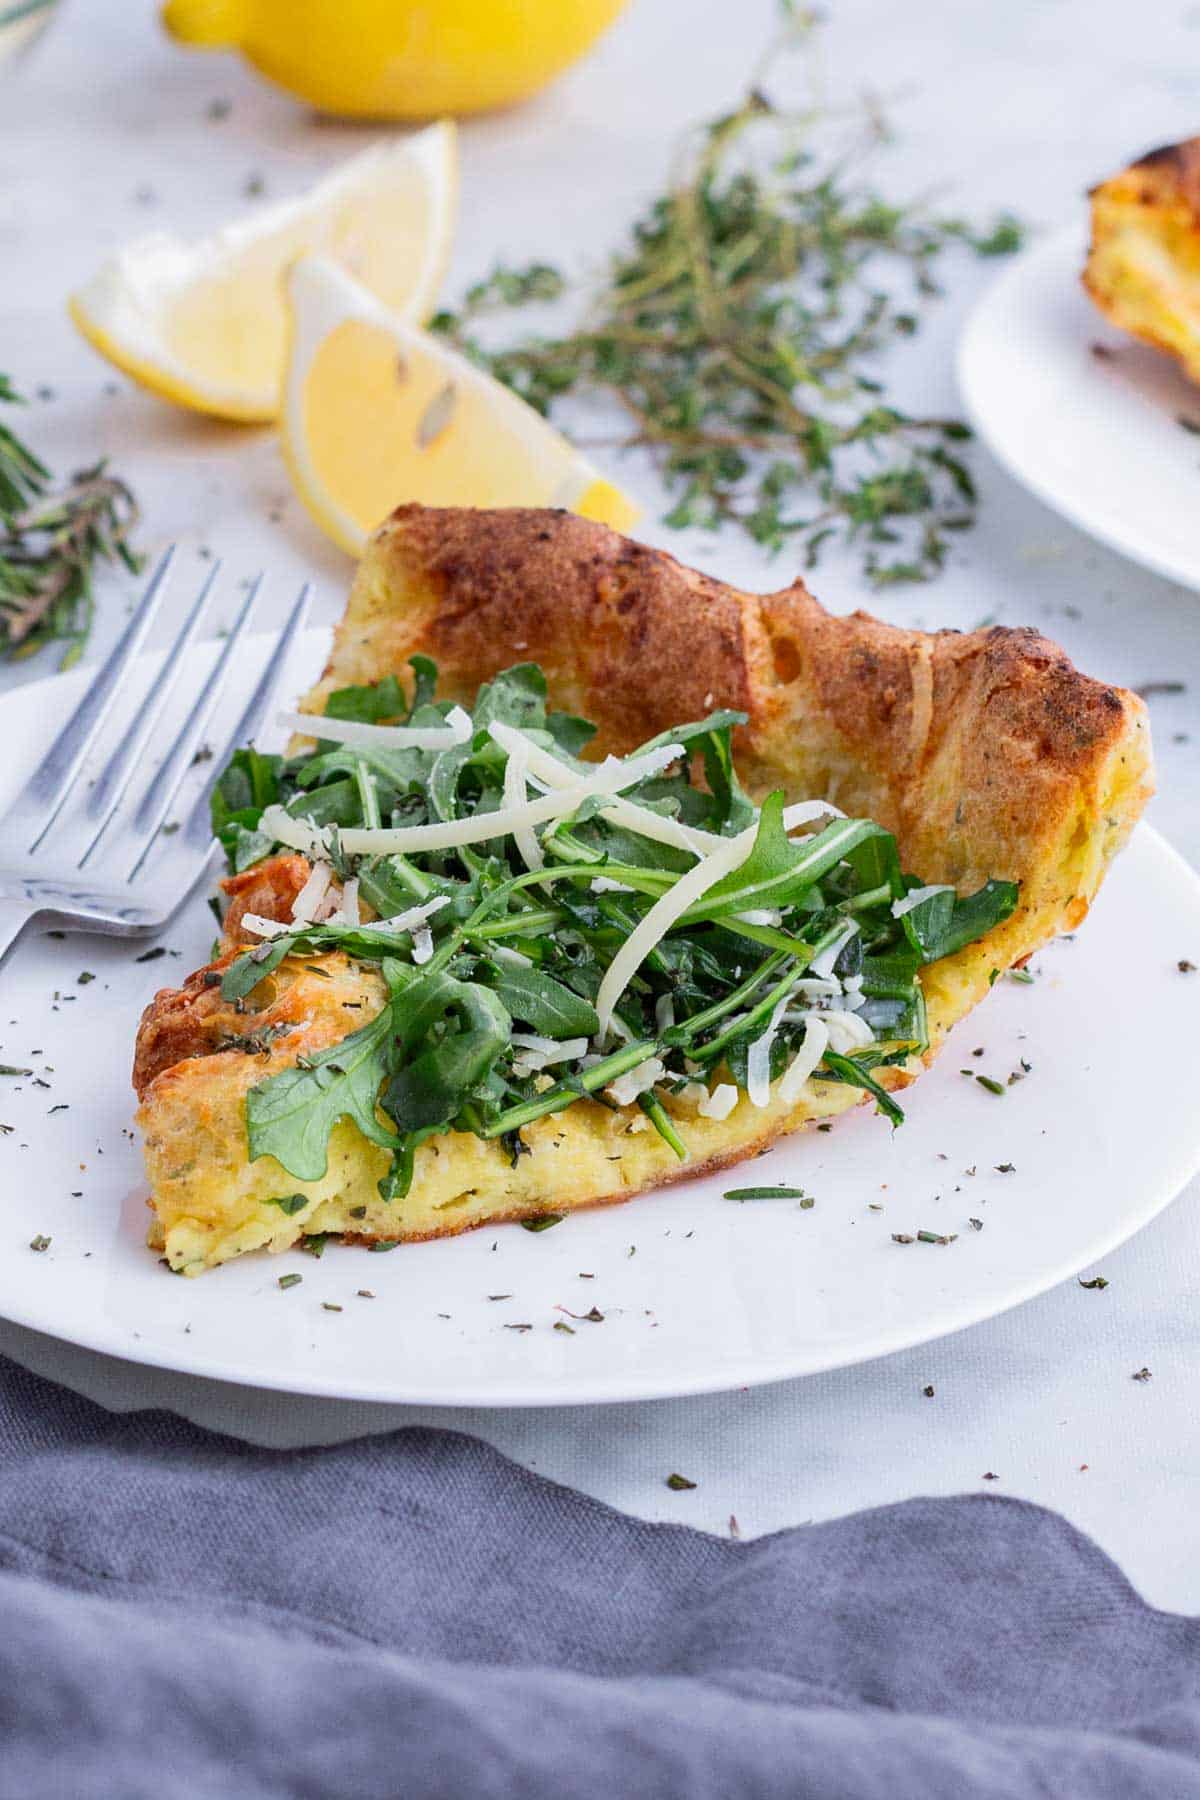 A slice of savory Dutch baby is served on a white plate.